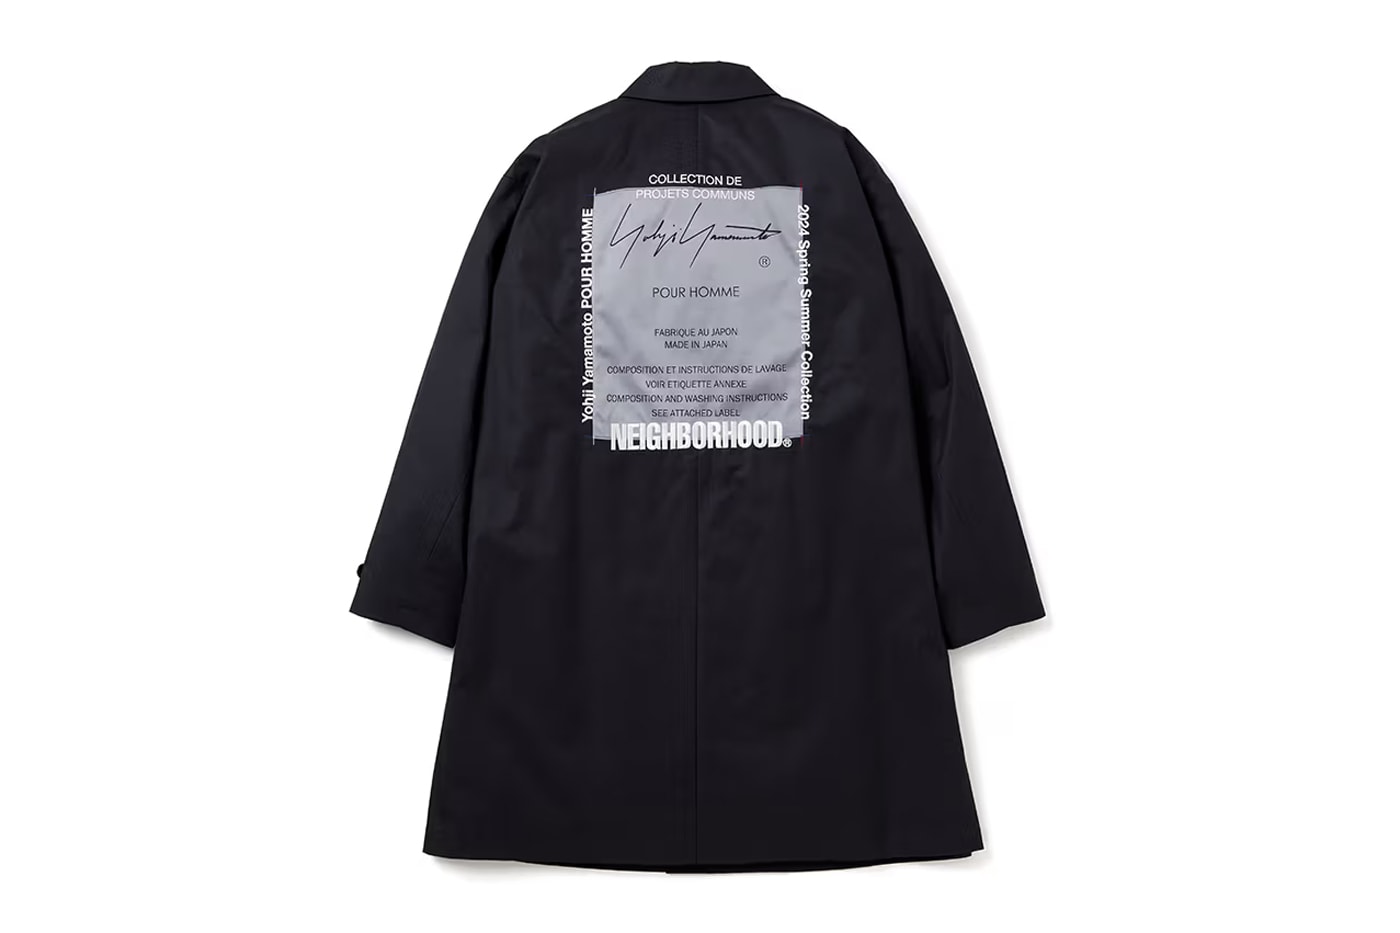 NEIGHBORHOOD and Yohji Yamamoto Pour Homme Join Together For Second Collaboration tshirt varsity jackets rebellious spirit antithesis 